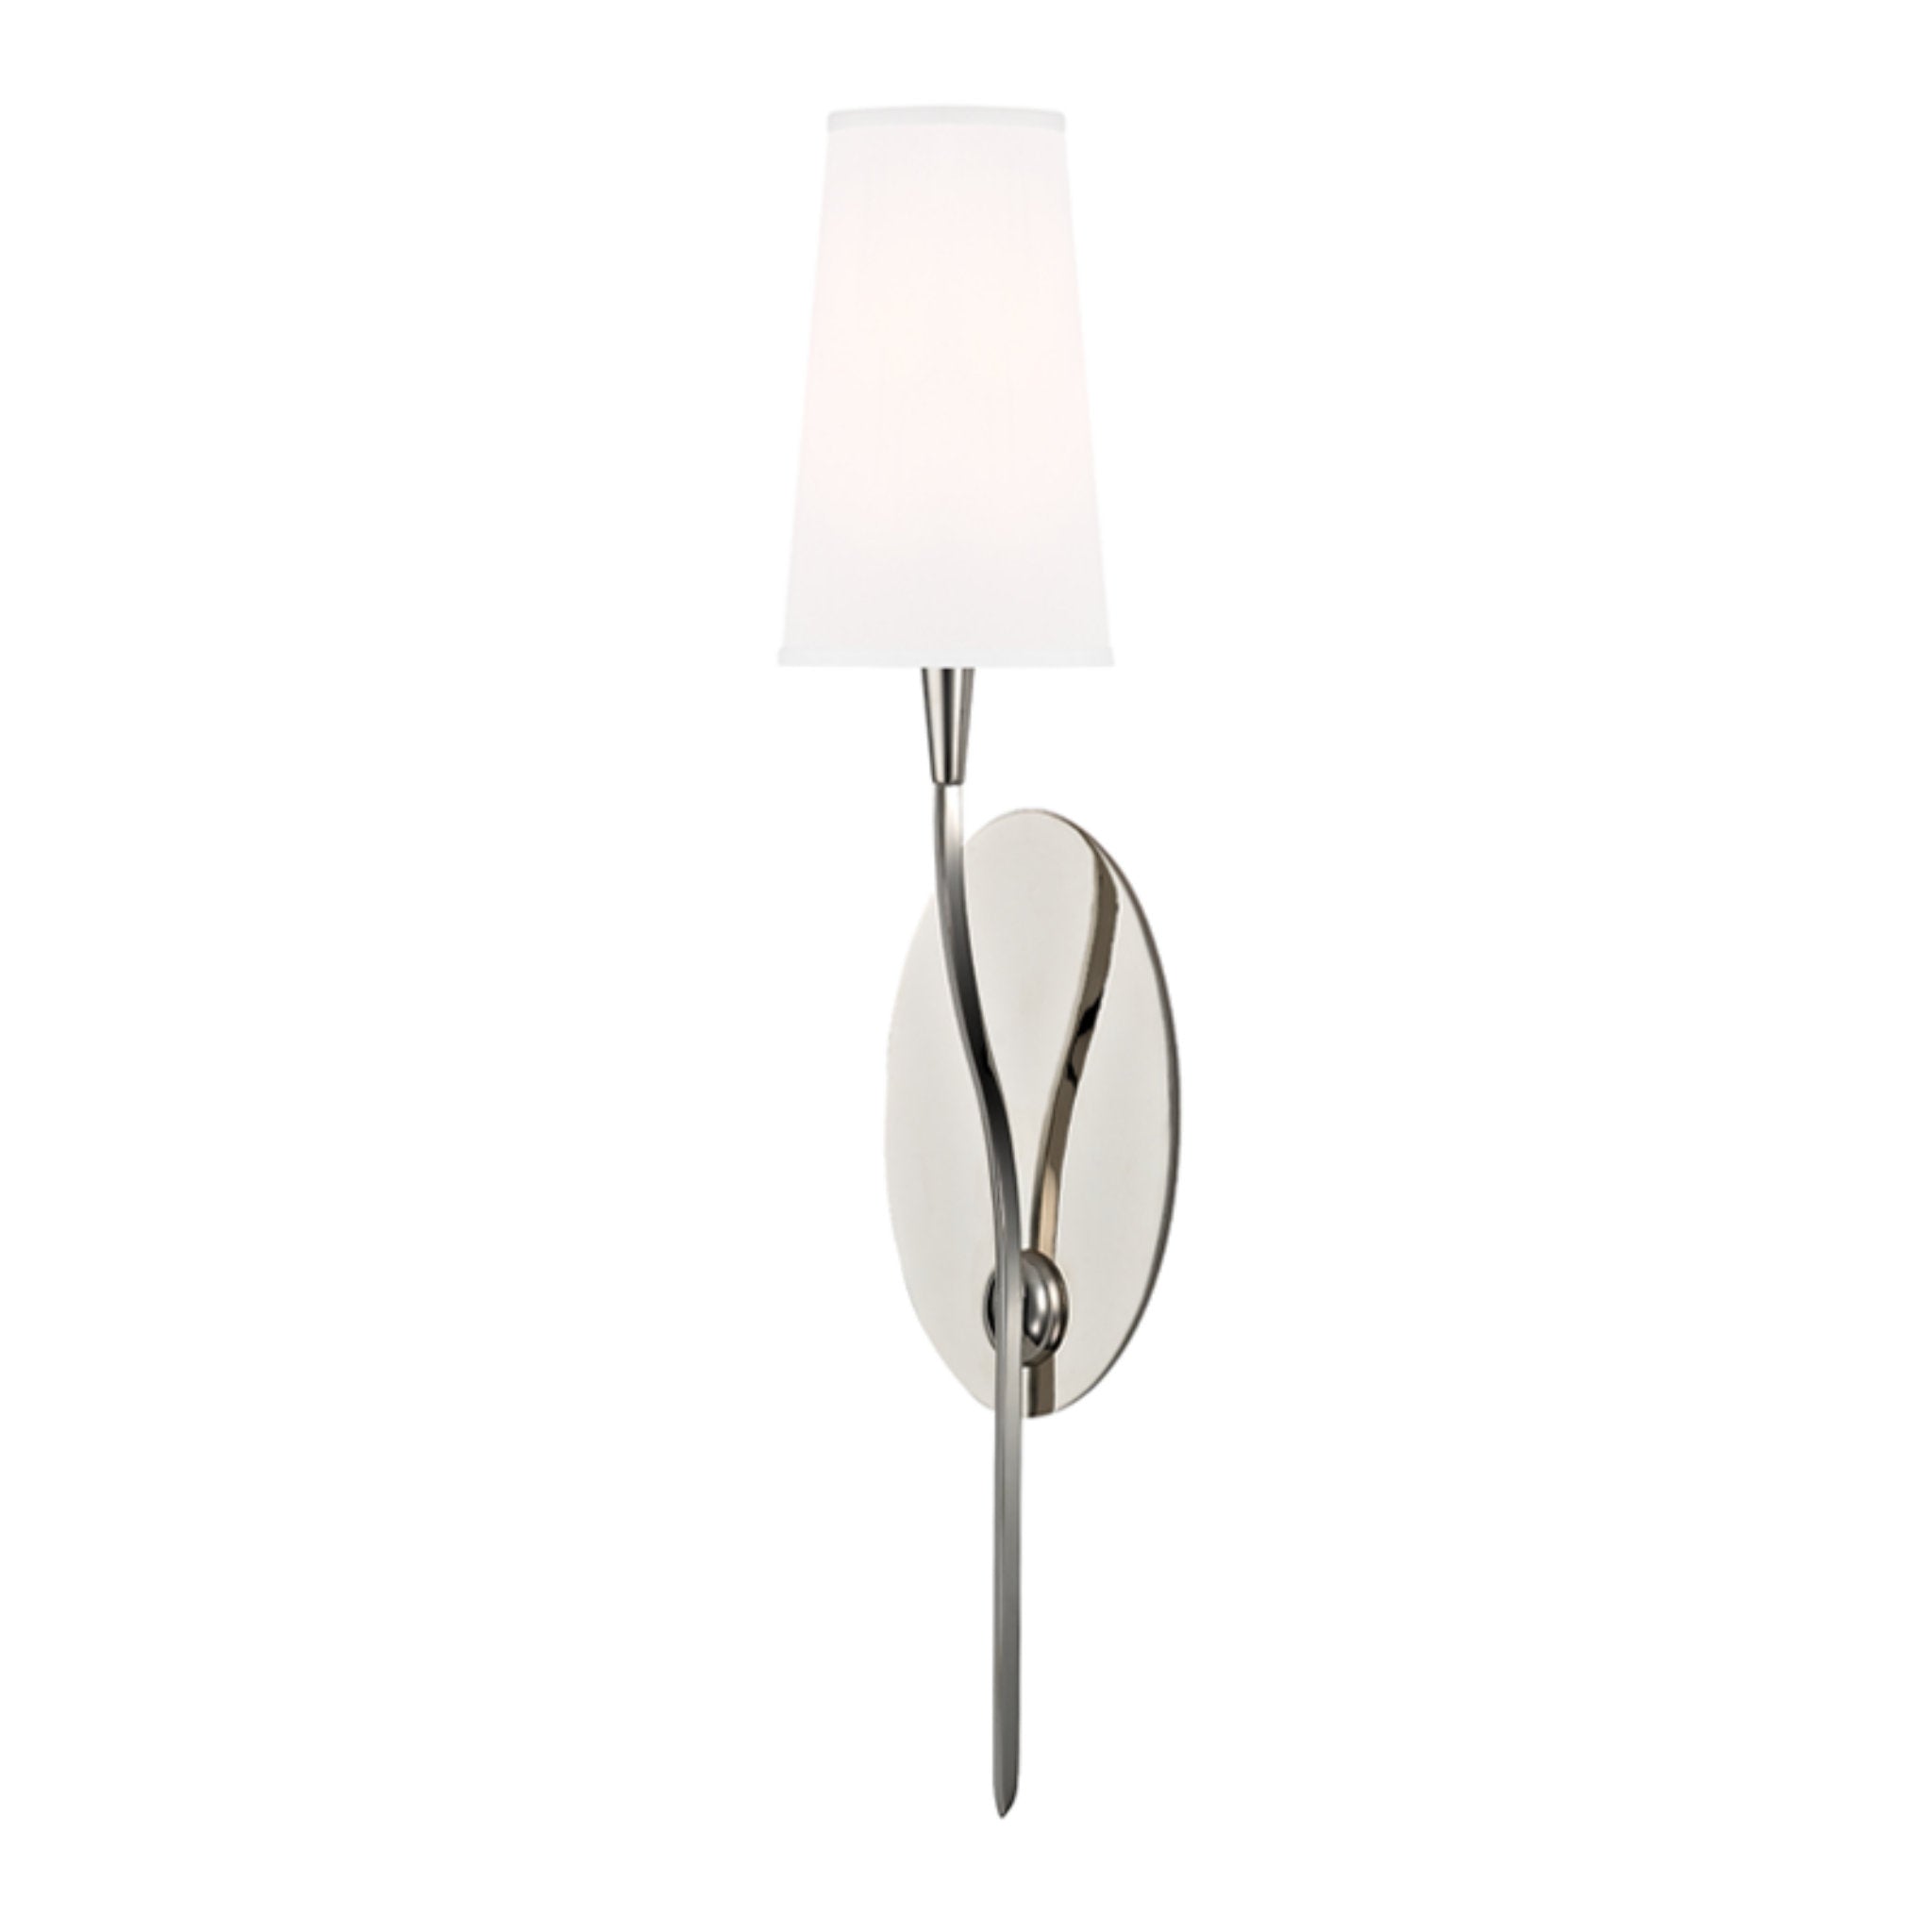 Rutland 1 Light Wall Sconce in Polished Nickel